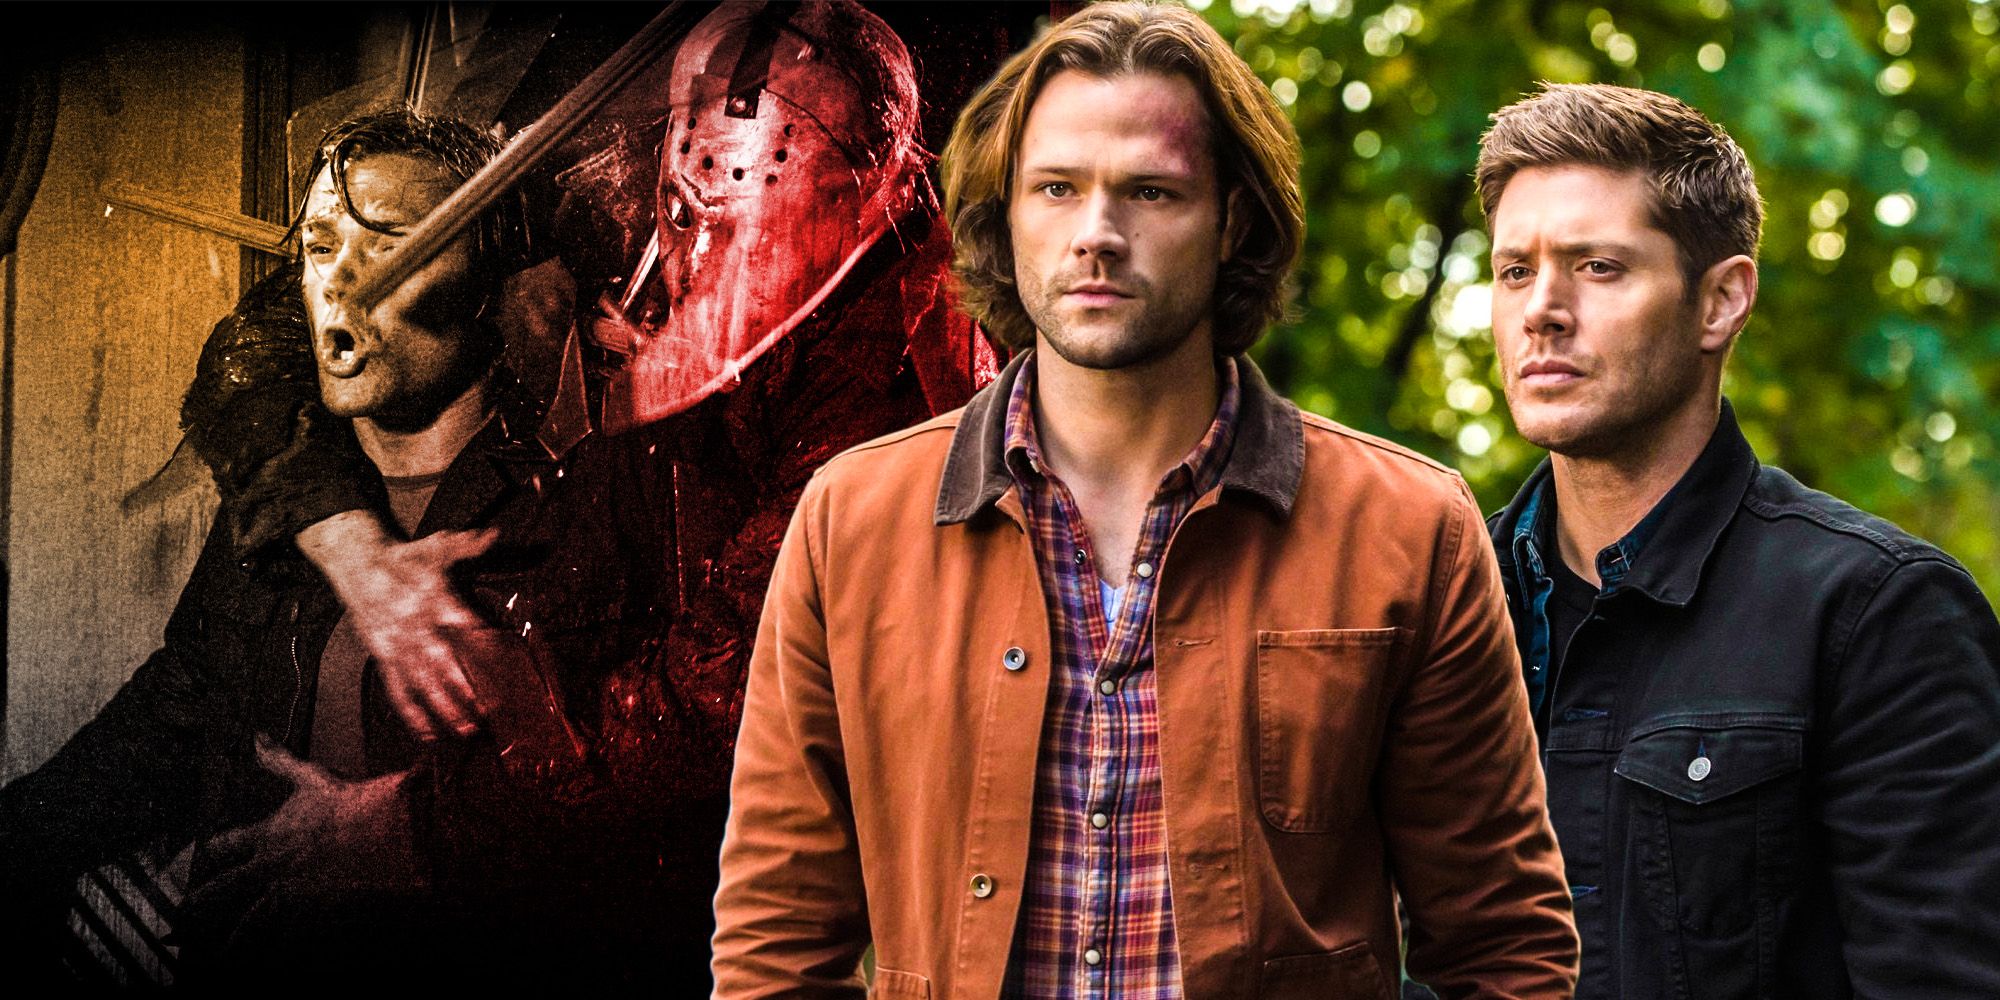 Supernatural Season 3s Scrapped Jason Voorhees Cameo (& Why It Was Cut)